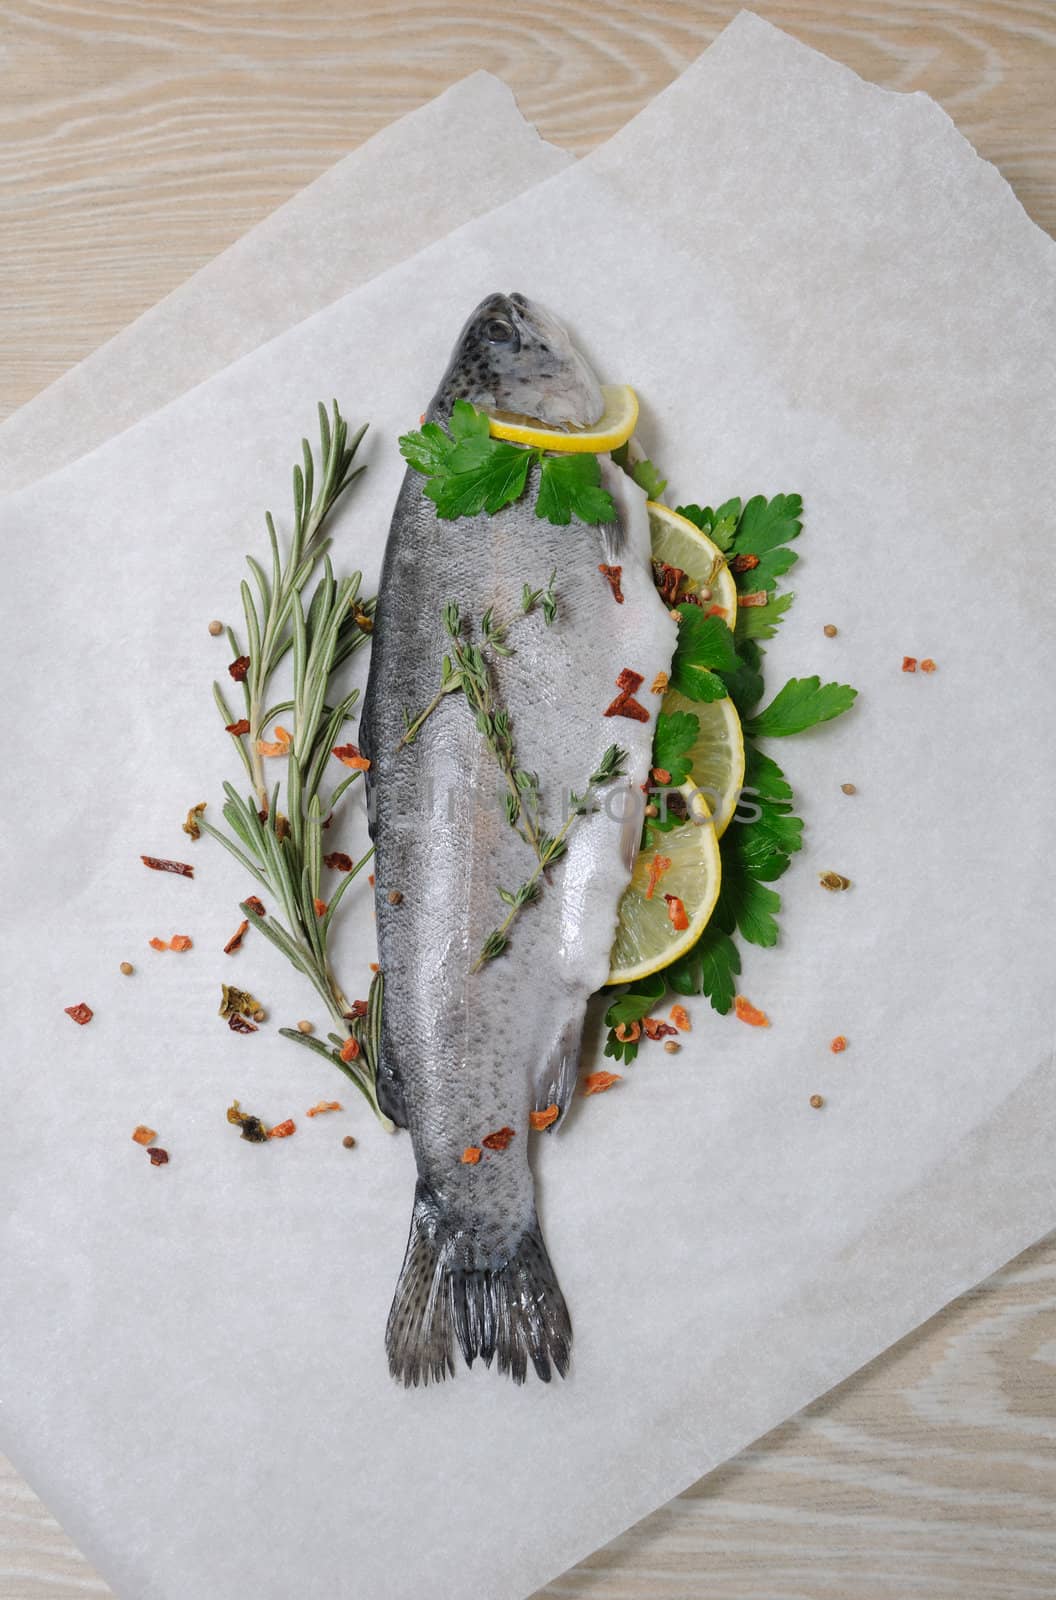 Fresh trout with lemon and spices on paper